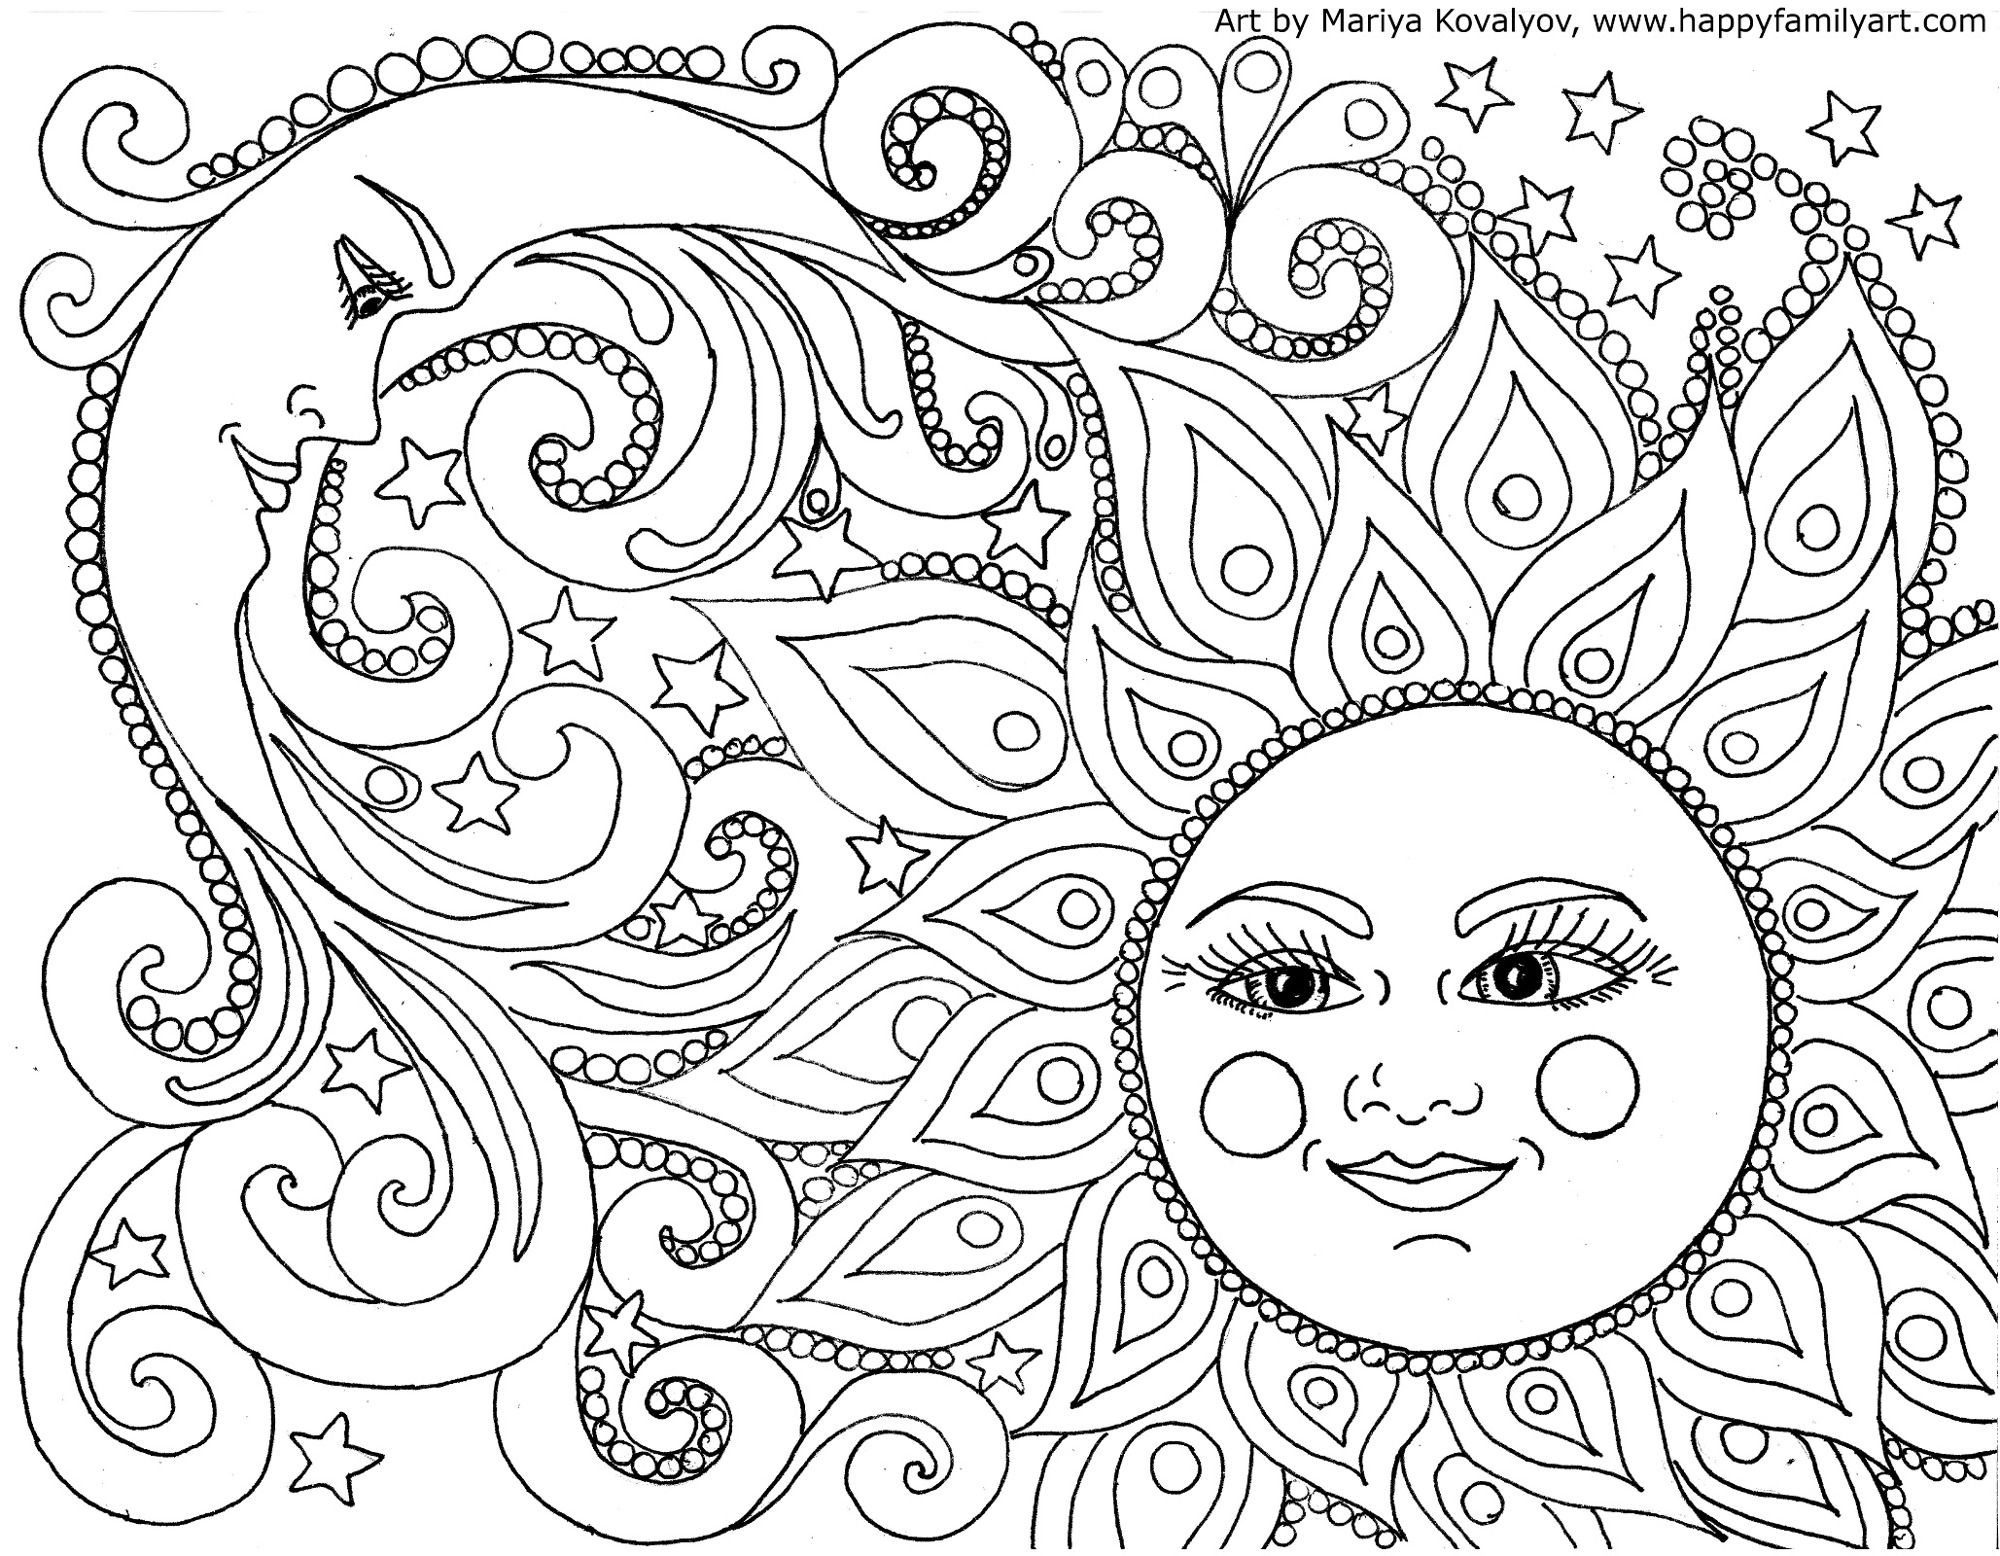  | Coloring Pages For Adults